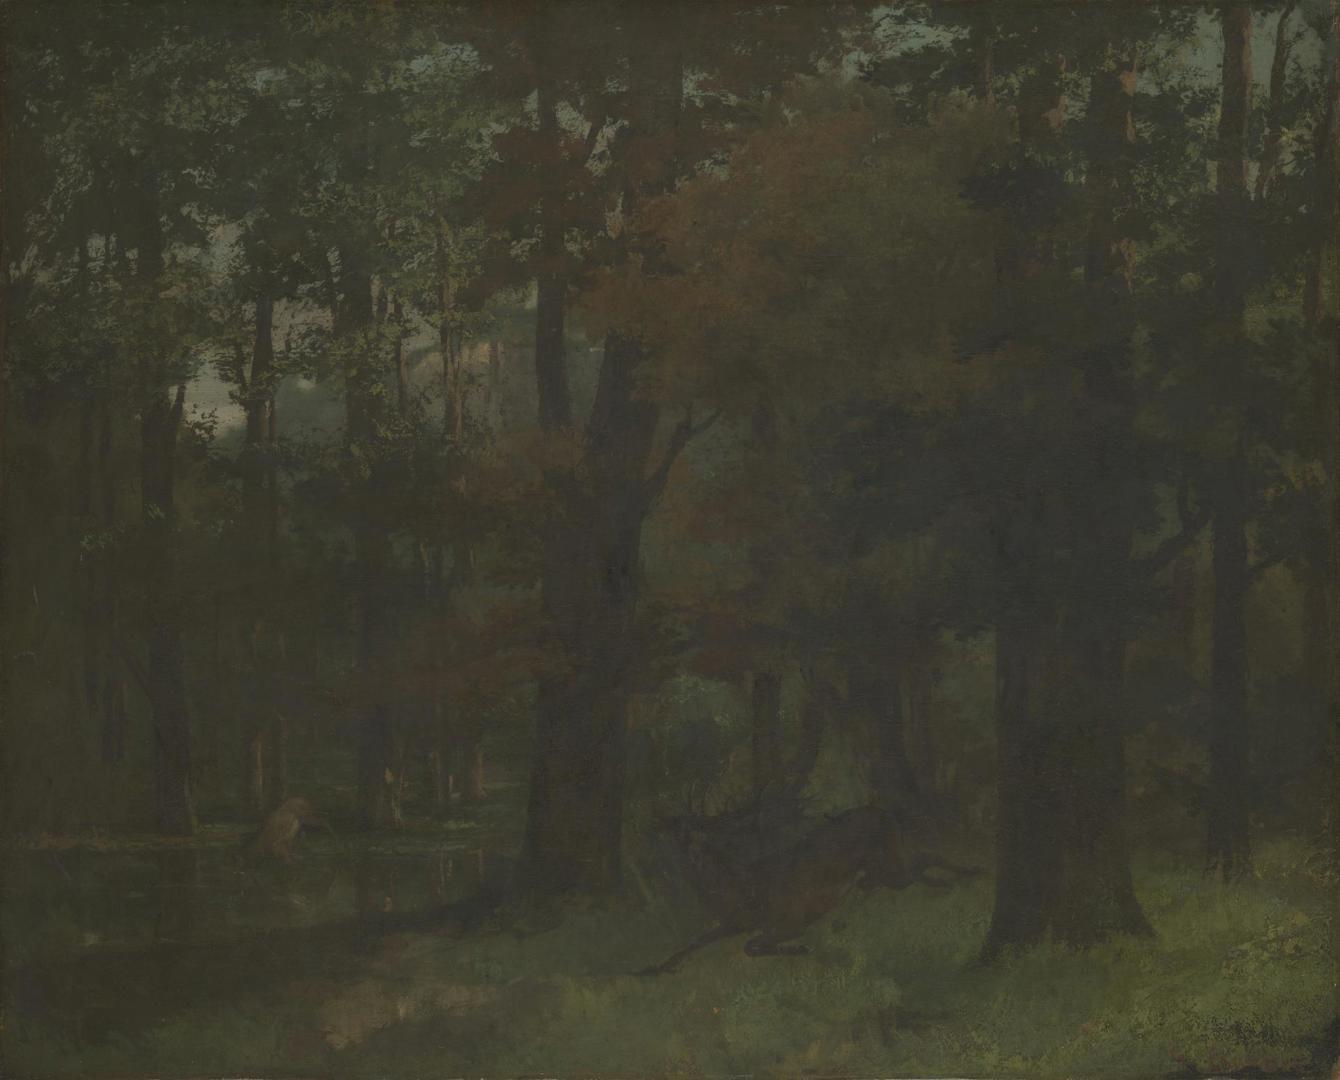 In the Forest by Gustave Courbet